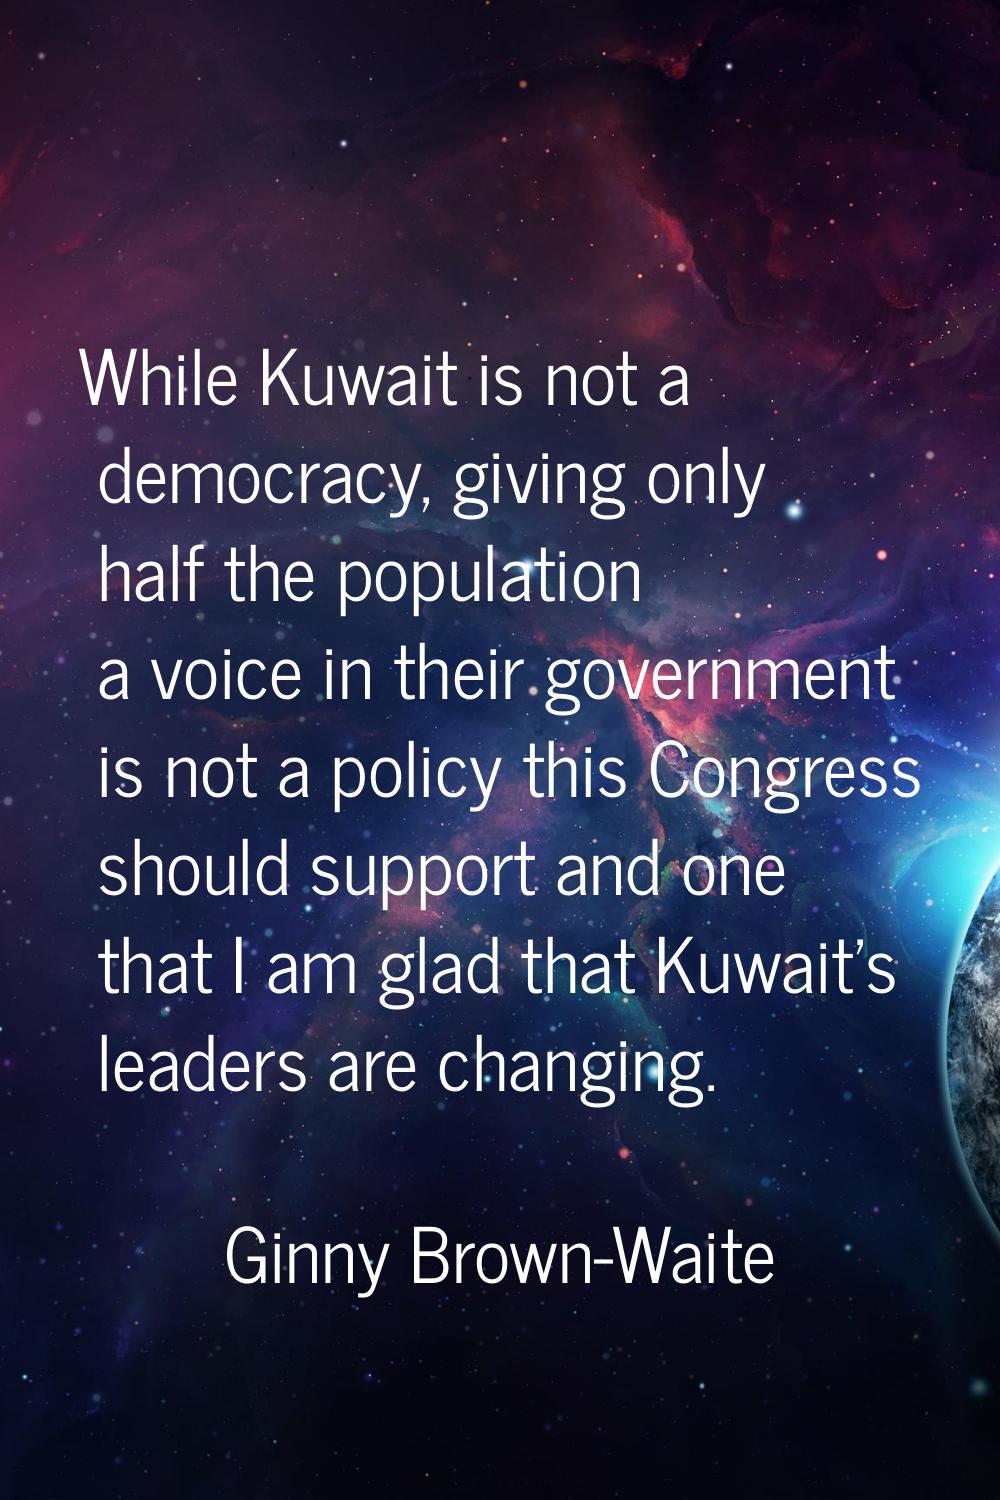 While Kuwait is not a democracy, giving only half the population a voice in their government is not